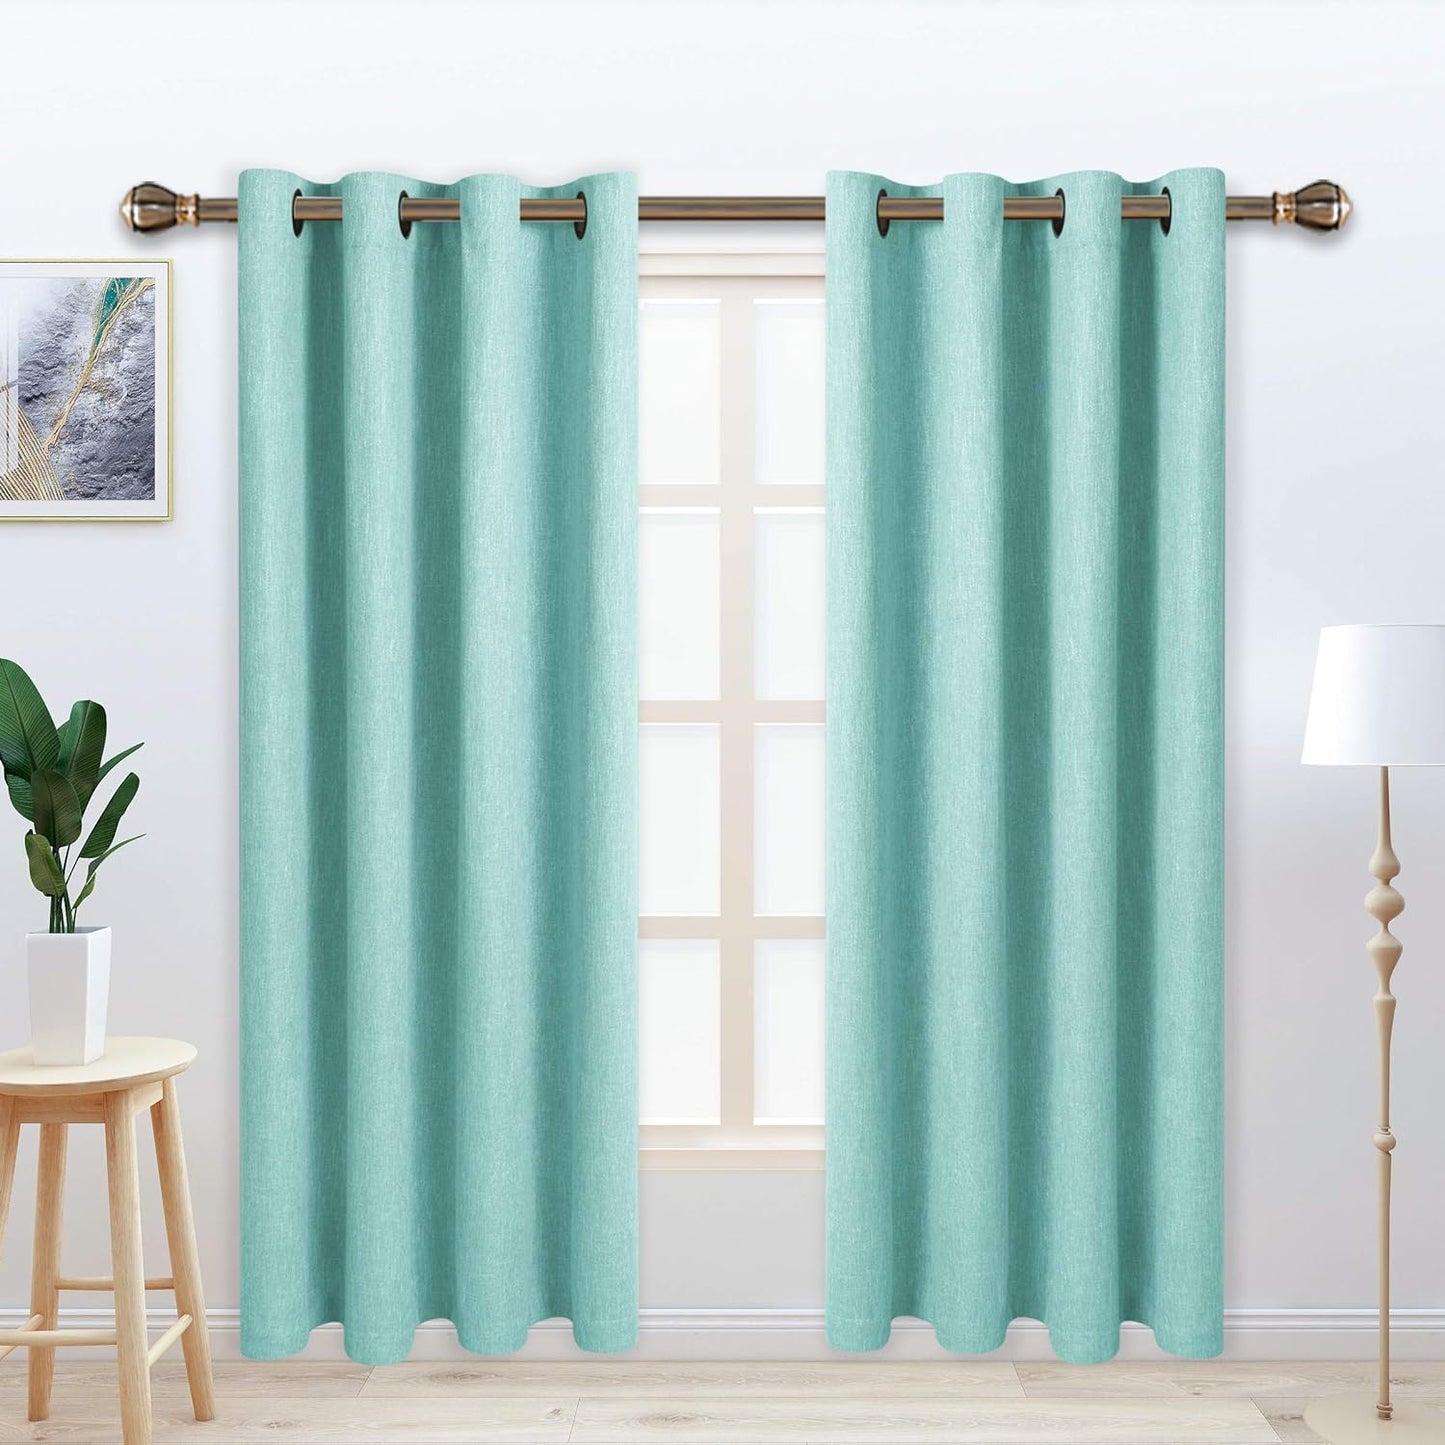 LORDTEX Linen Look Textured Blackout Curtains with Thermal Insulated Liner - Heavy Thick Grommet Window Drapes for Bedroom, 50 X 84 Inches, Ivory, Set of 2 Panels  LORDTEX Seafoam 50 X 95 Inches 